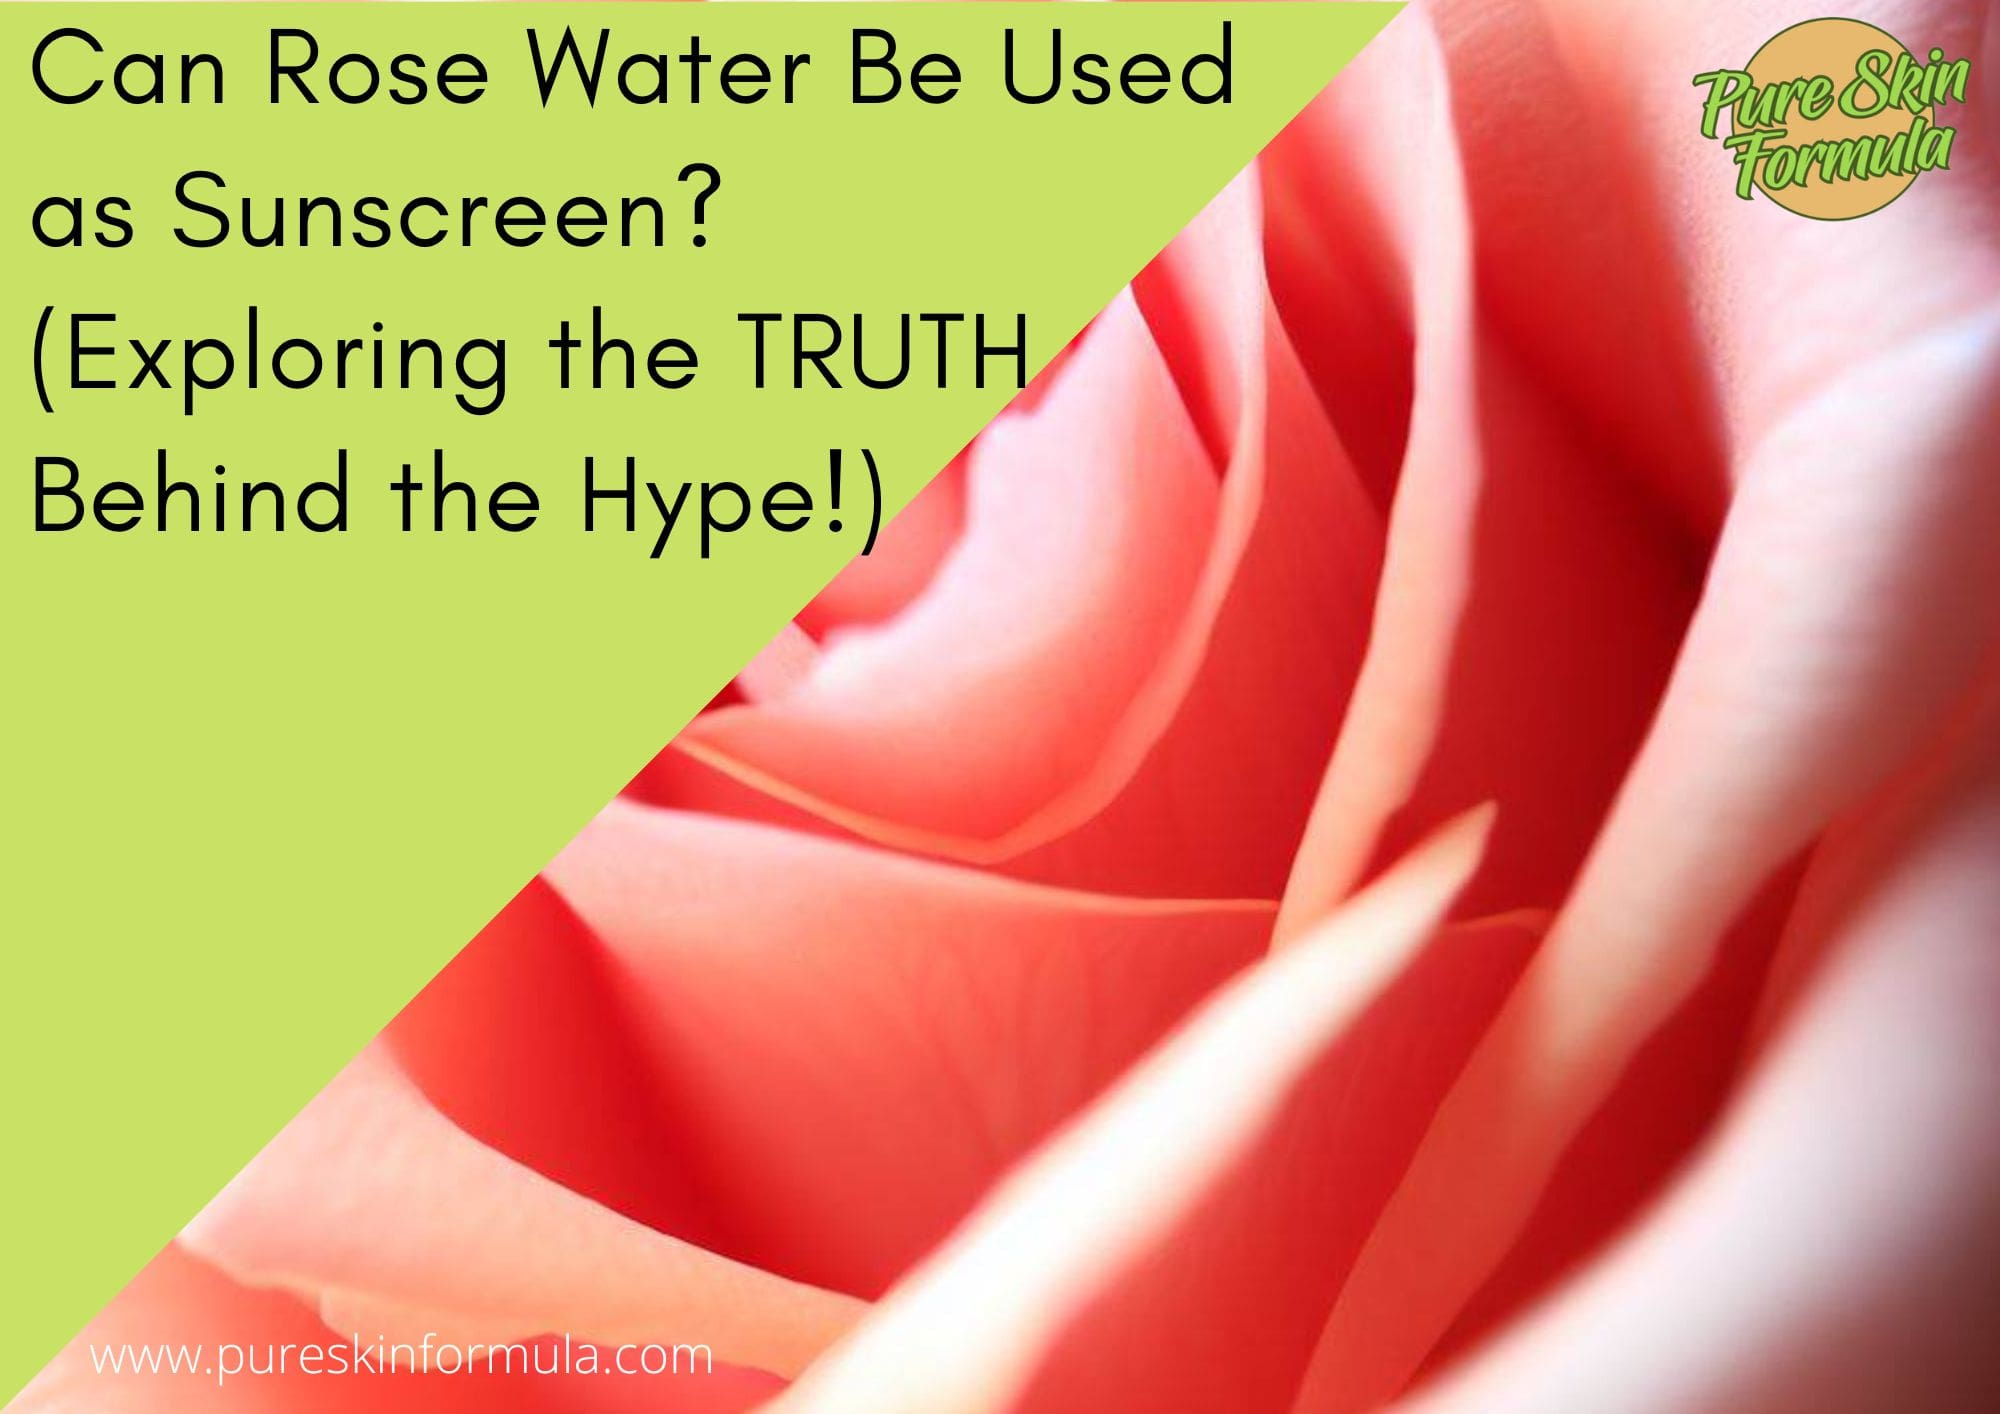 Can Rose Water Be Used as Sunscreen_featured image